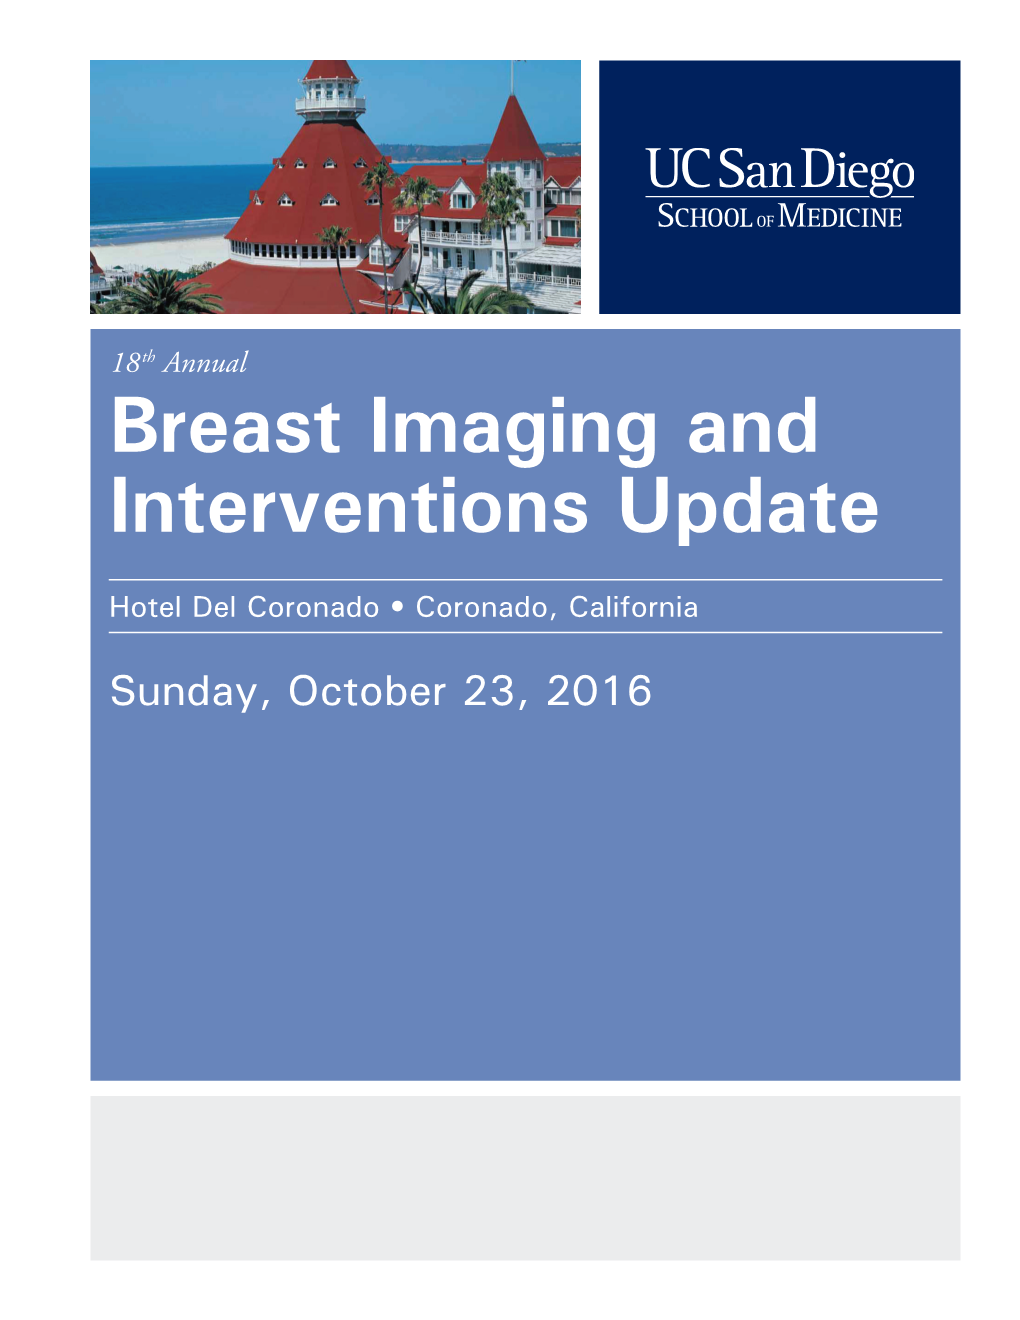 Breast Imaging and Interventions Update